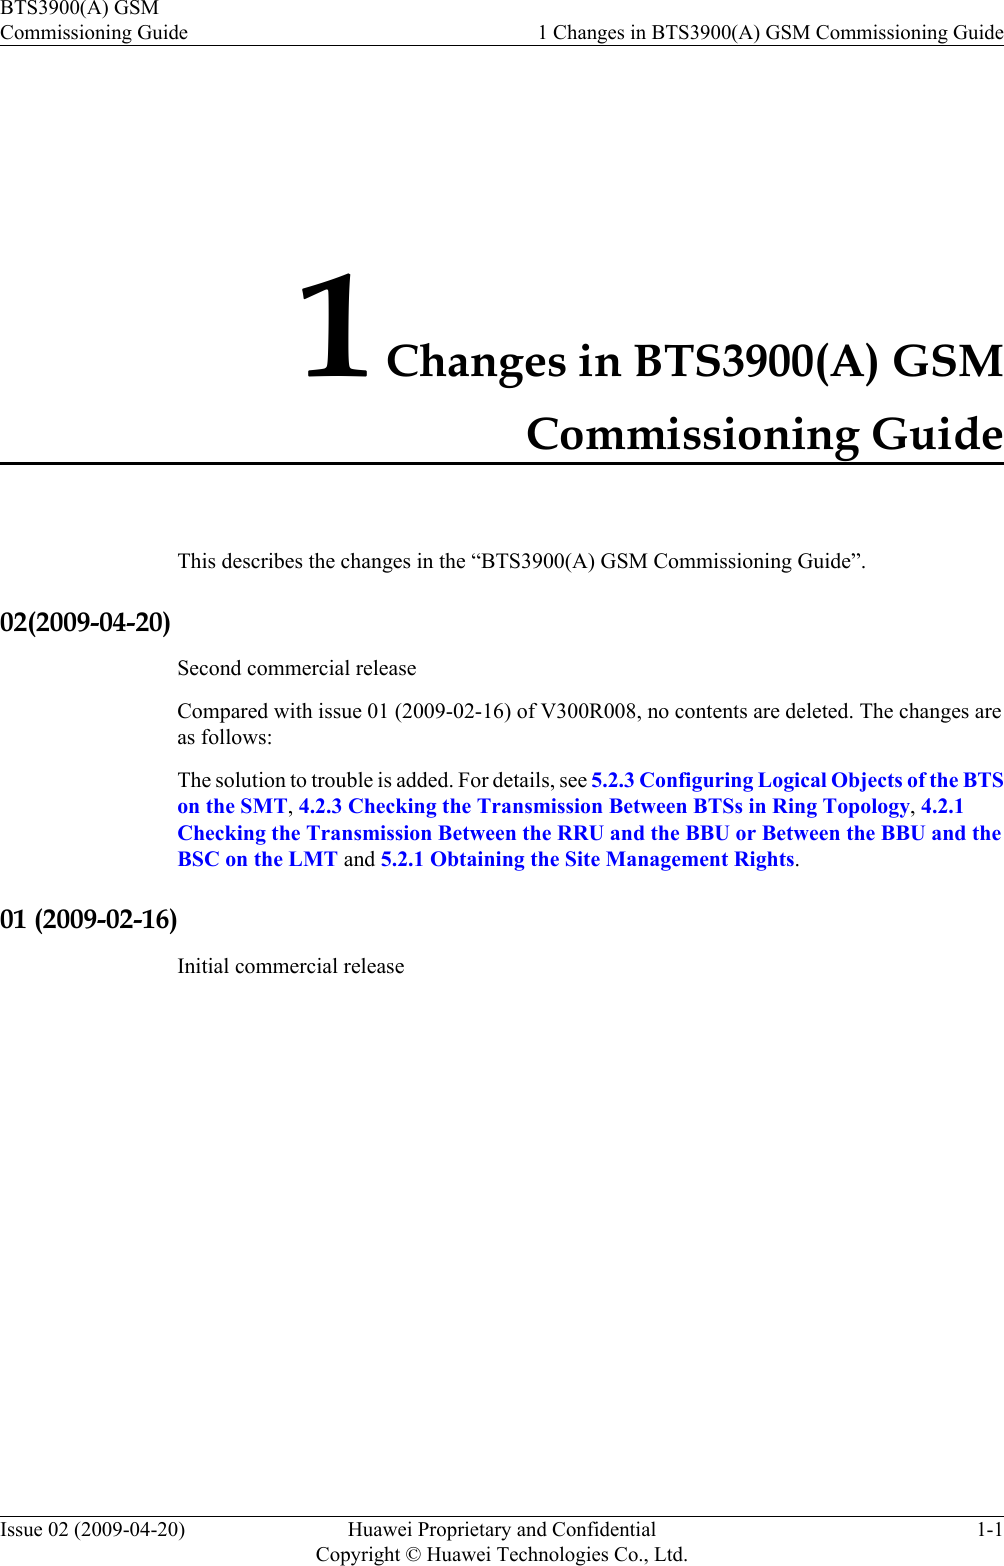 1 Changes in BTS3900(A) GSMCommissioning GuideThis describes the changes in the “BTS3900(A) GSM Commissioning Guide”.02(2009-04-20)Second commercial releaseCompared with issue 01 (2009-02-16) of V300R008, no contents are deleted. The changes areas follows:The solution to trouble is added. For details, see 5.2.3 Configuring Logical Objects of the BTSon the SMT, 4.2.3 Checking the Transmission Between BTSs in Ring Topology, 4.2.1Checking the Transmission Between the RRU and the BBU or Between the BBU and theBSC on the LMT and 5.2.1 Obtaining the Site Management Rights.01 (2009-02-16)Initial commercial releaseBTS3900(A) GSMCommissioning Guide 1 Changes in BTS3900(A) GSM Commissioning GuideIssue 02 (2009-04-20) Huawei Proprietary and ConfidentialCopyright © Huawei Technologies Co., Ltd.1-1